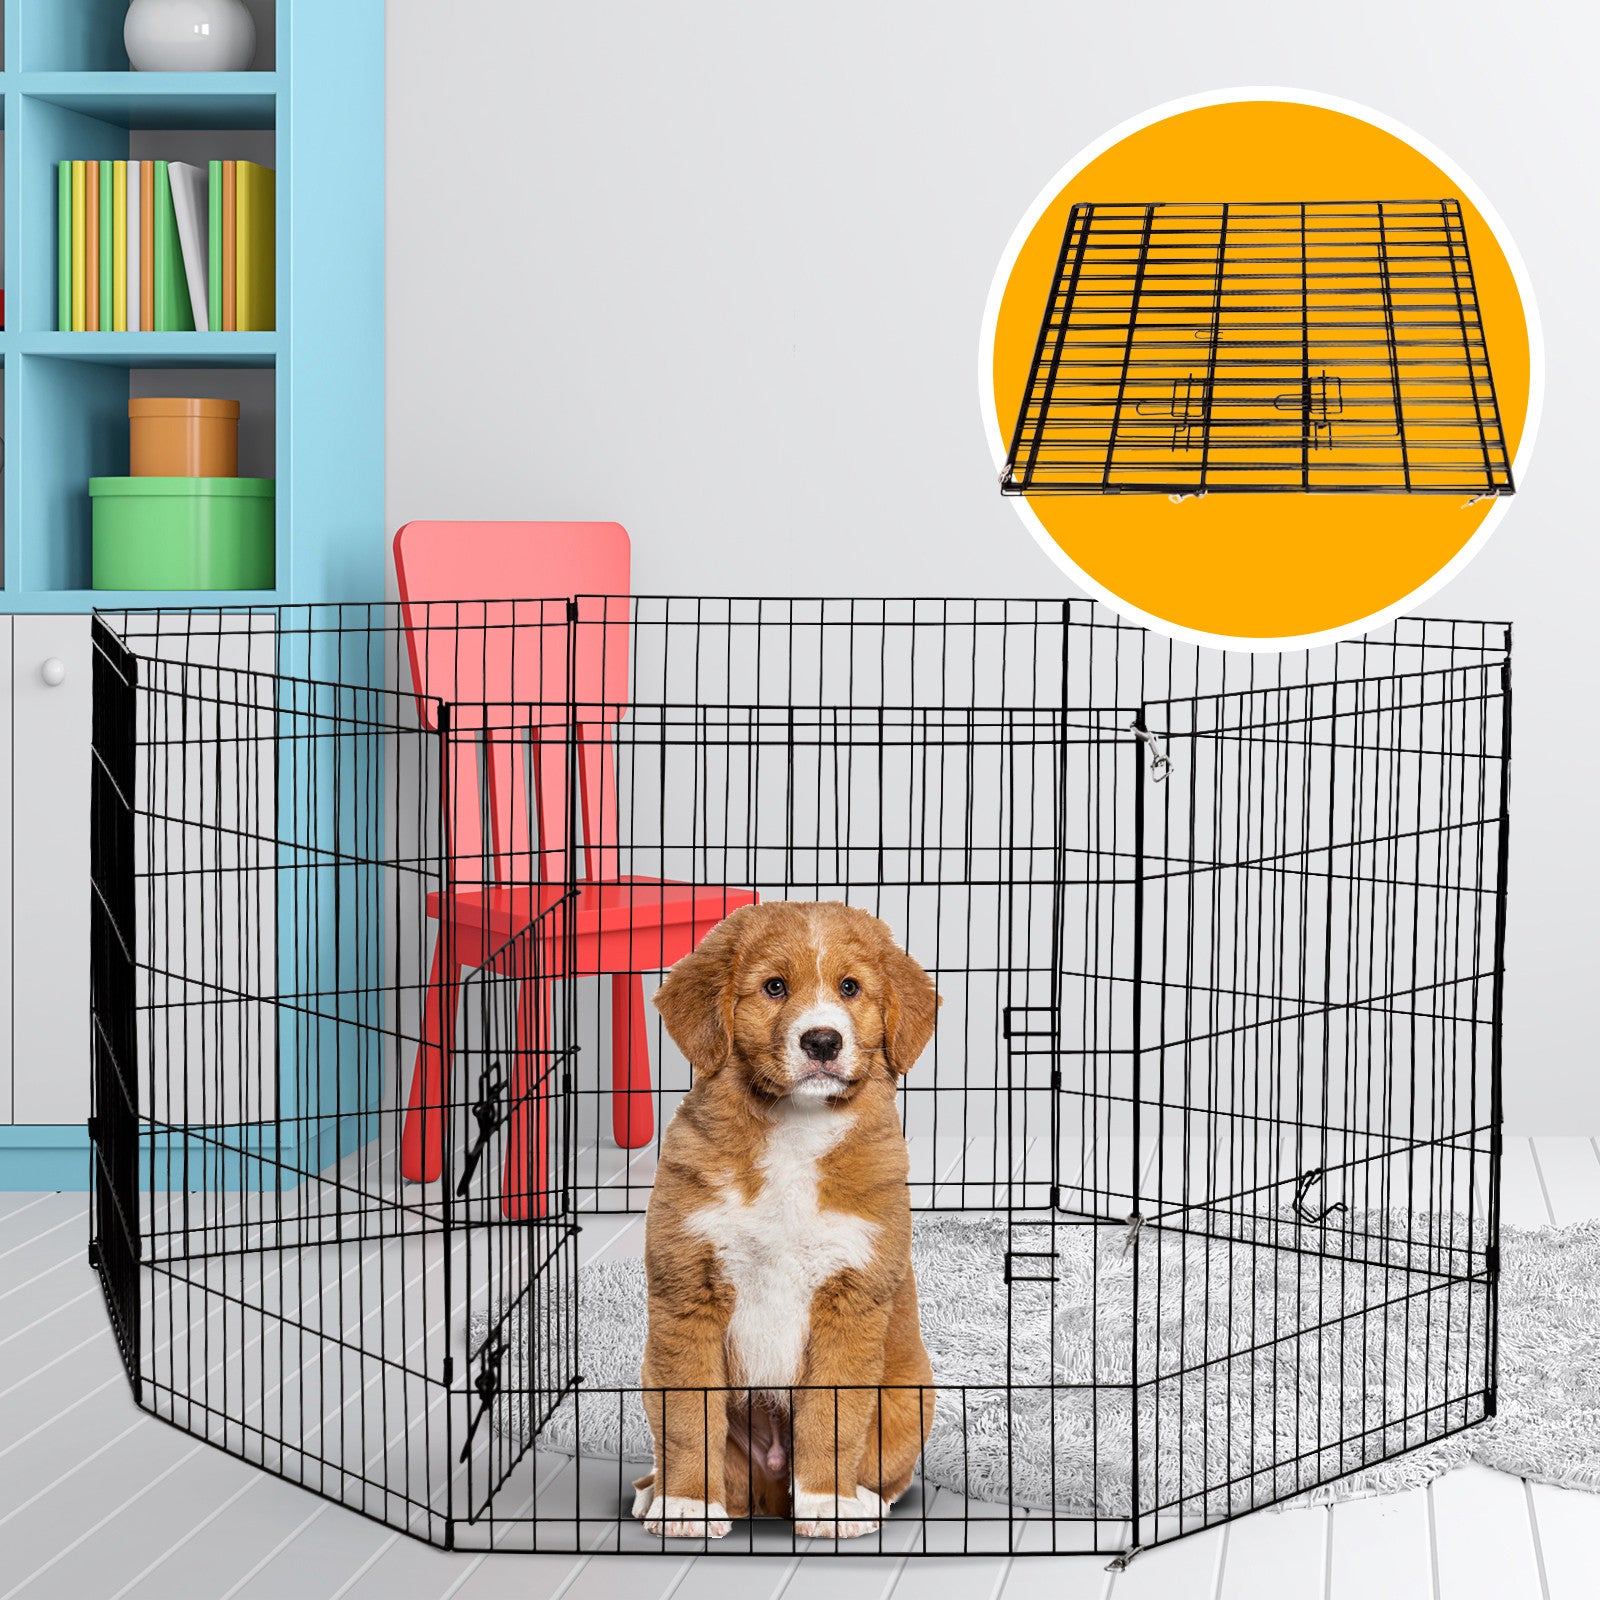 8 Panel Playpen Puppy Exercise Fence Cage Enclosure Pets Black All Sizes - 36" - Black